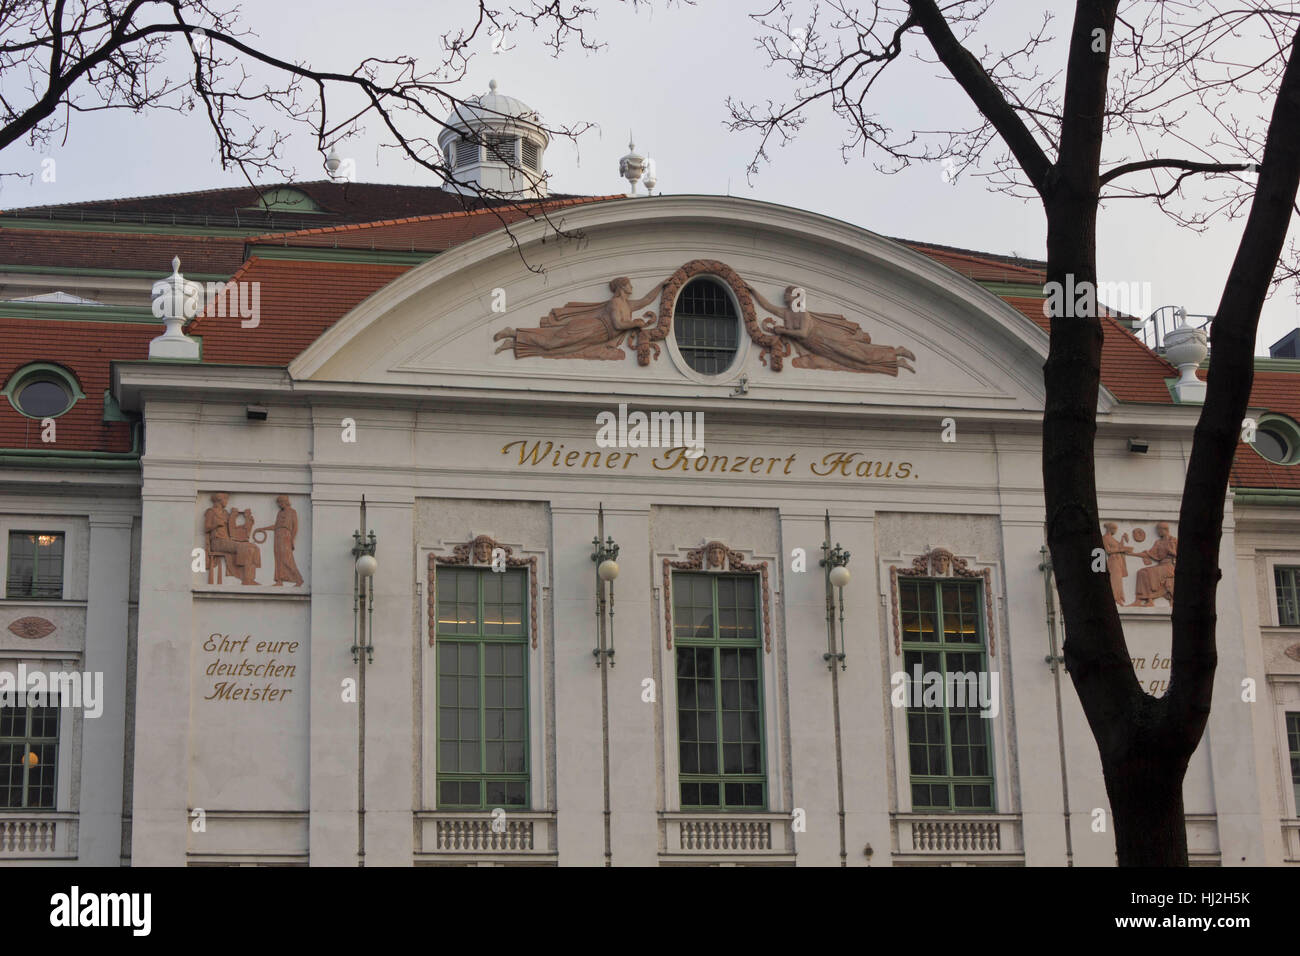 VIENNA, AUSTRIA - JANUARY 1 2016: Facade of Vienna Concert House building at day time Stock Photo